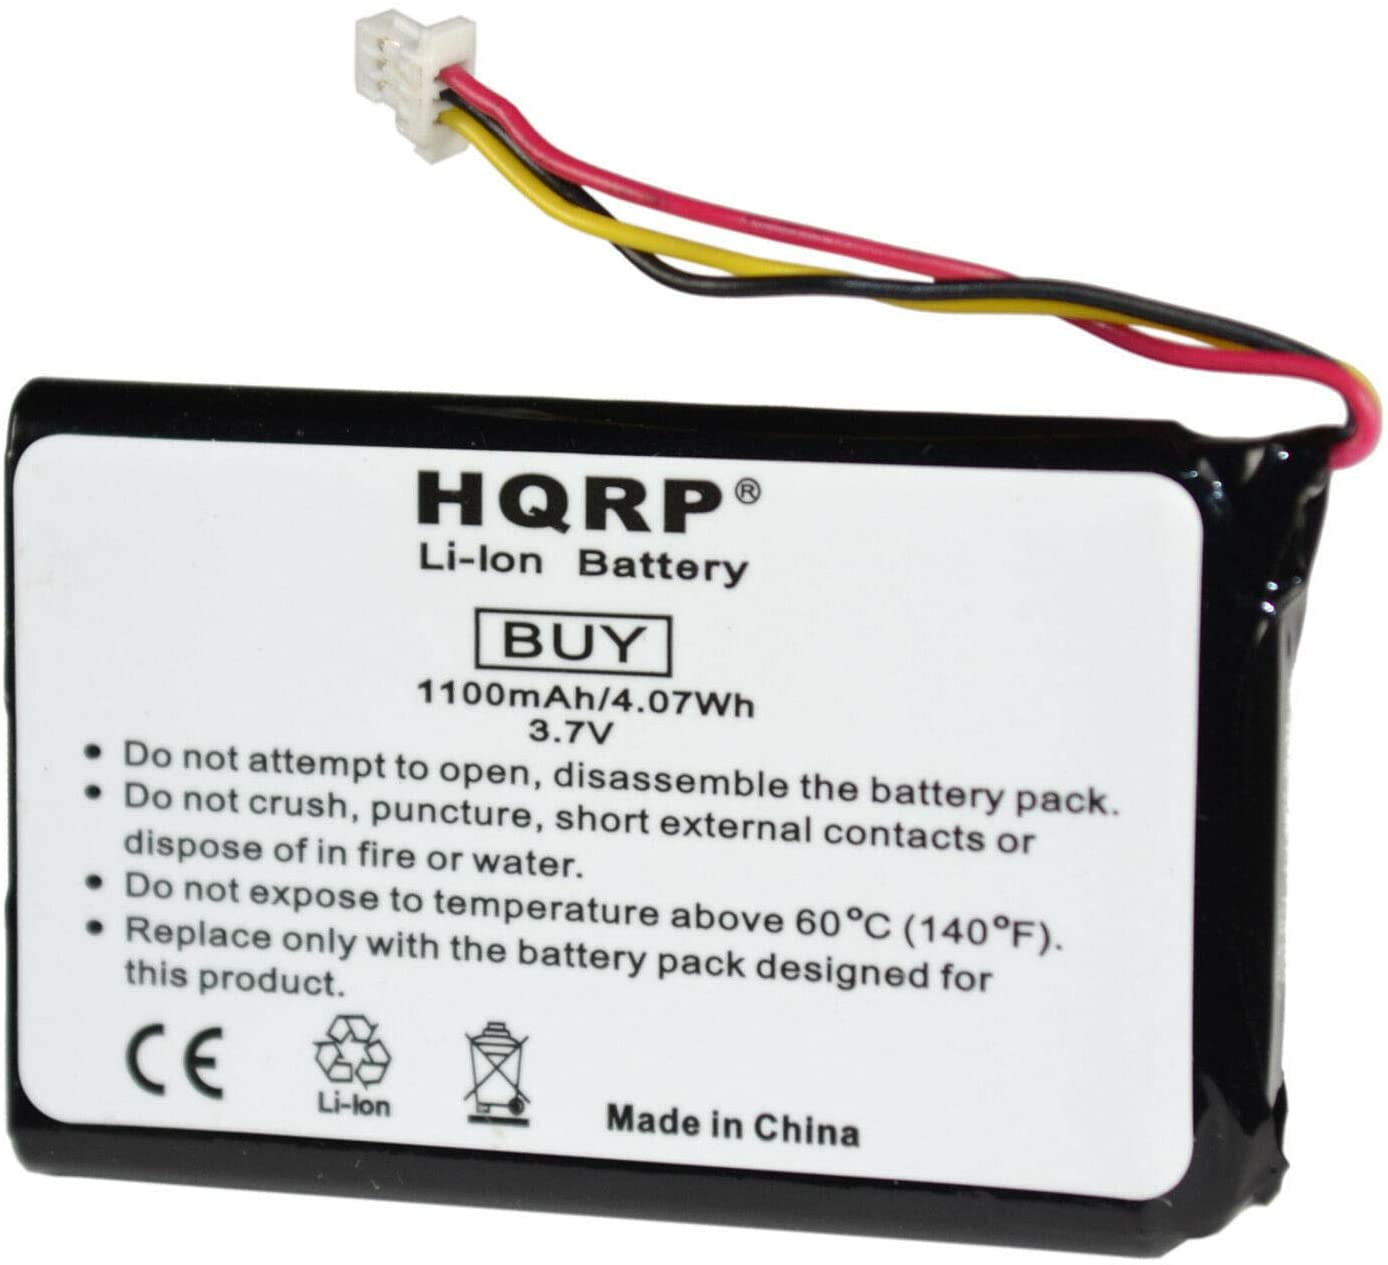 HQRP 2200mAh Battery for X-Rite 500 504 508 518 520 528 530 Spectrodensitometer 